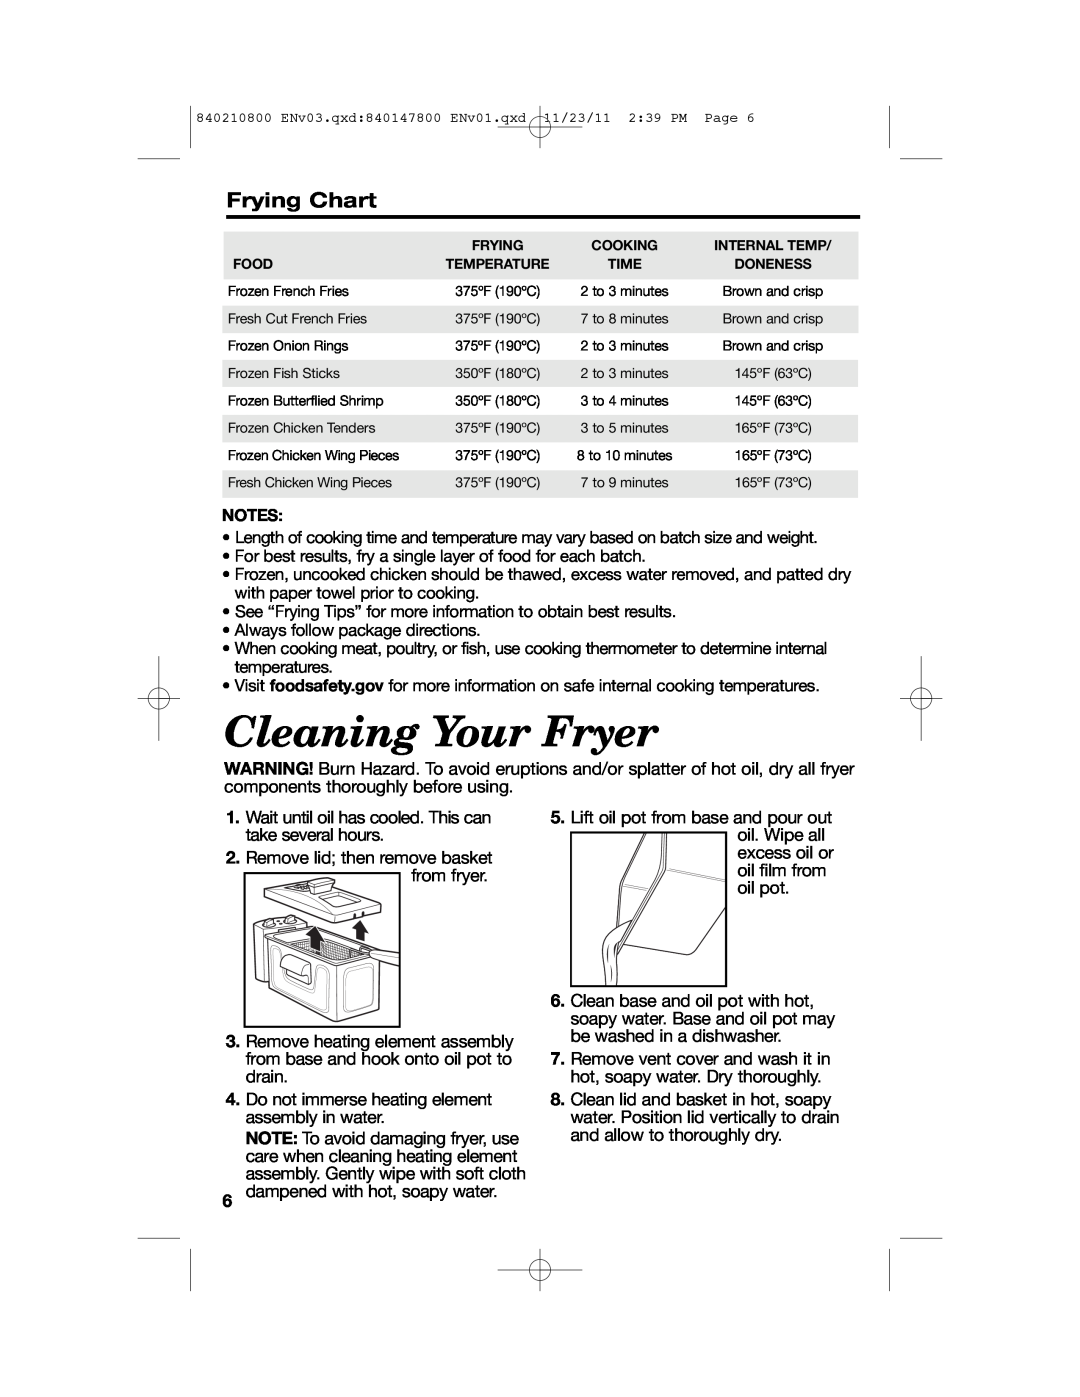 Hamilton Beach 35200 manual Cleaning Your Fryer, Frying Chart 